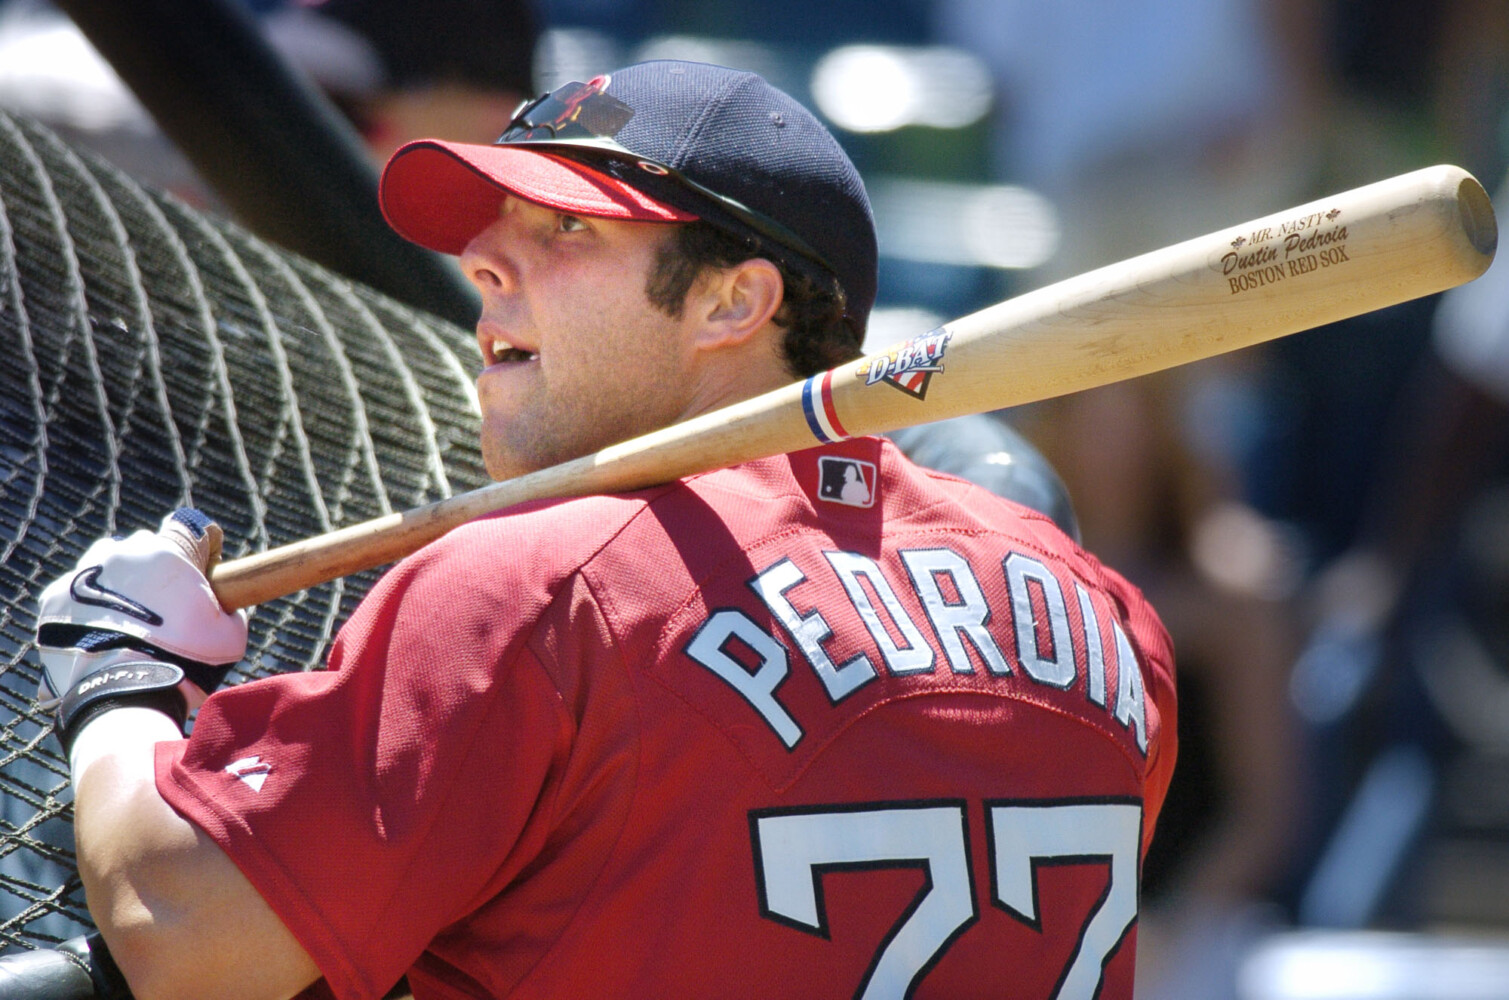 Dustin (Pedroia) was as good as it gets,' says his Sea Dogs manager